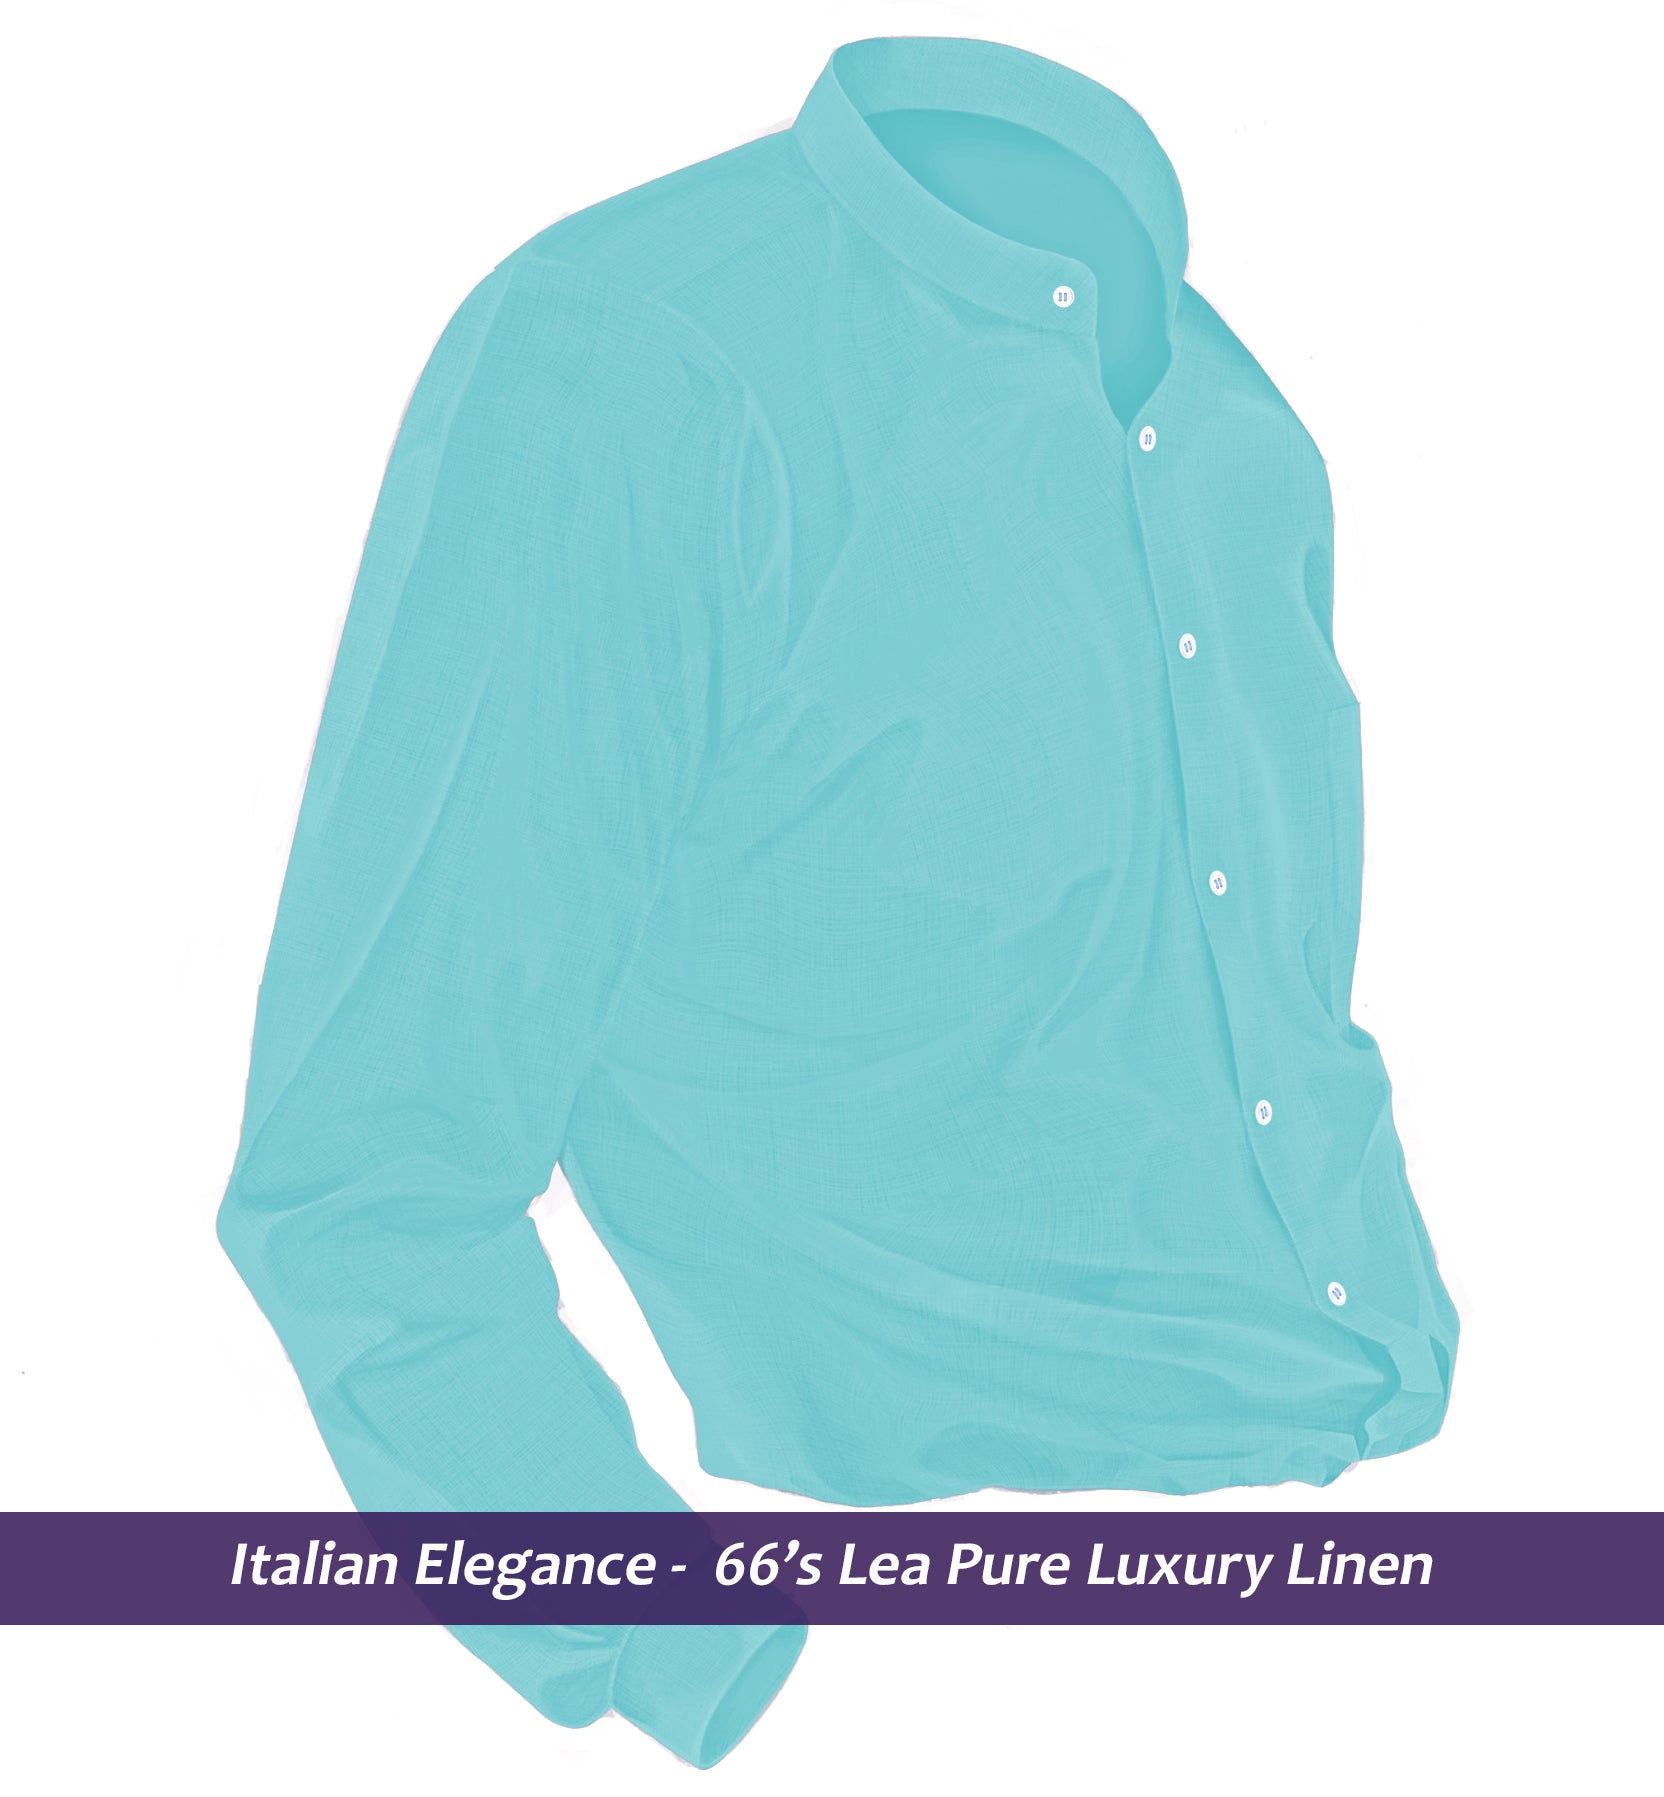 Munich- Turquoise Green Linen- Mandarin Collar- 66's Lea Pure Luxury Linen-Delivery from 6th May